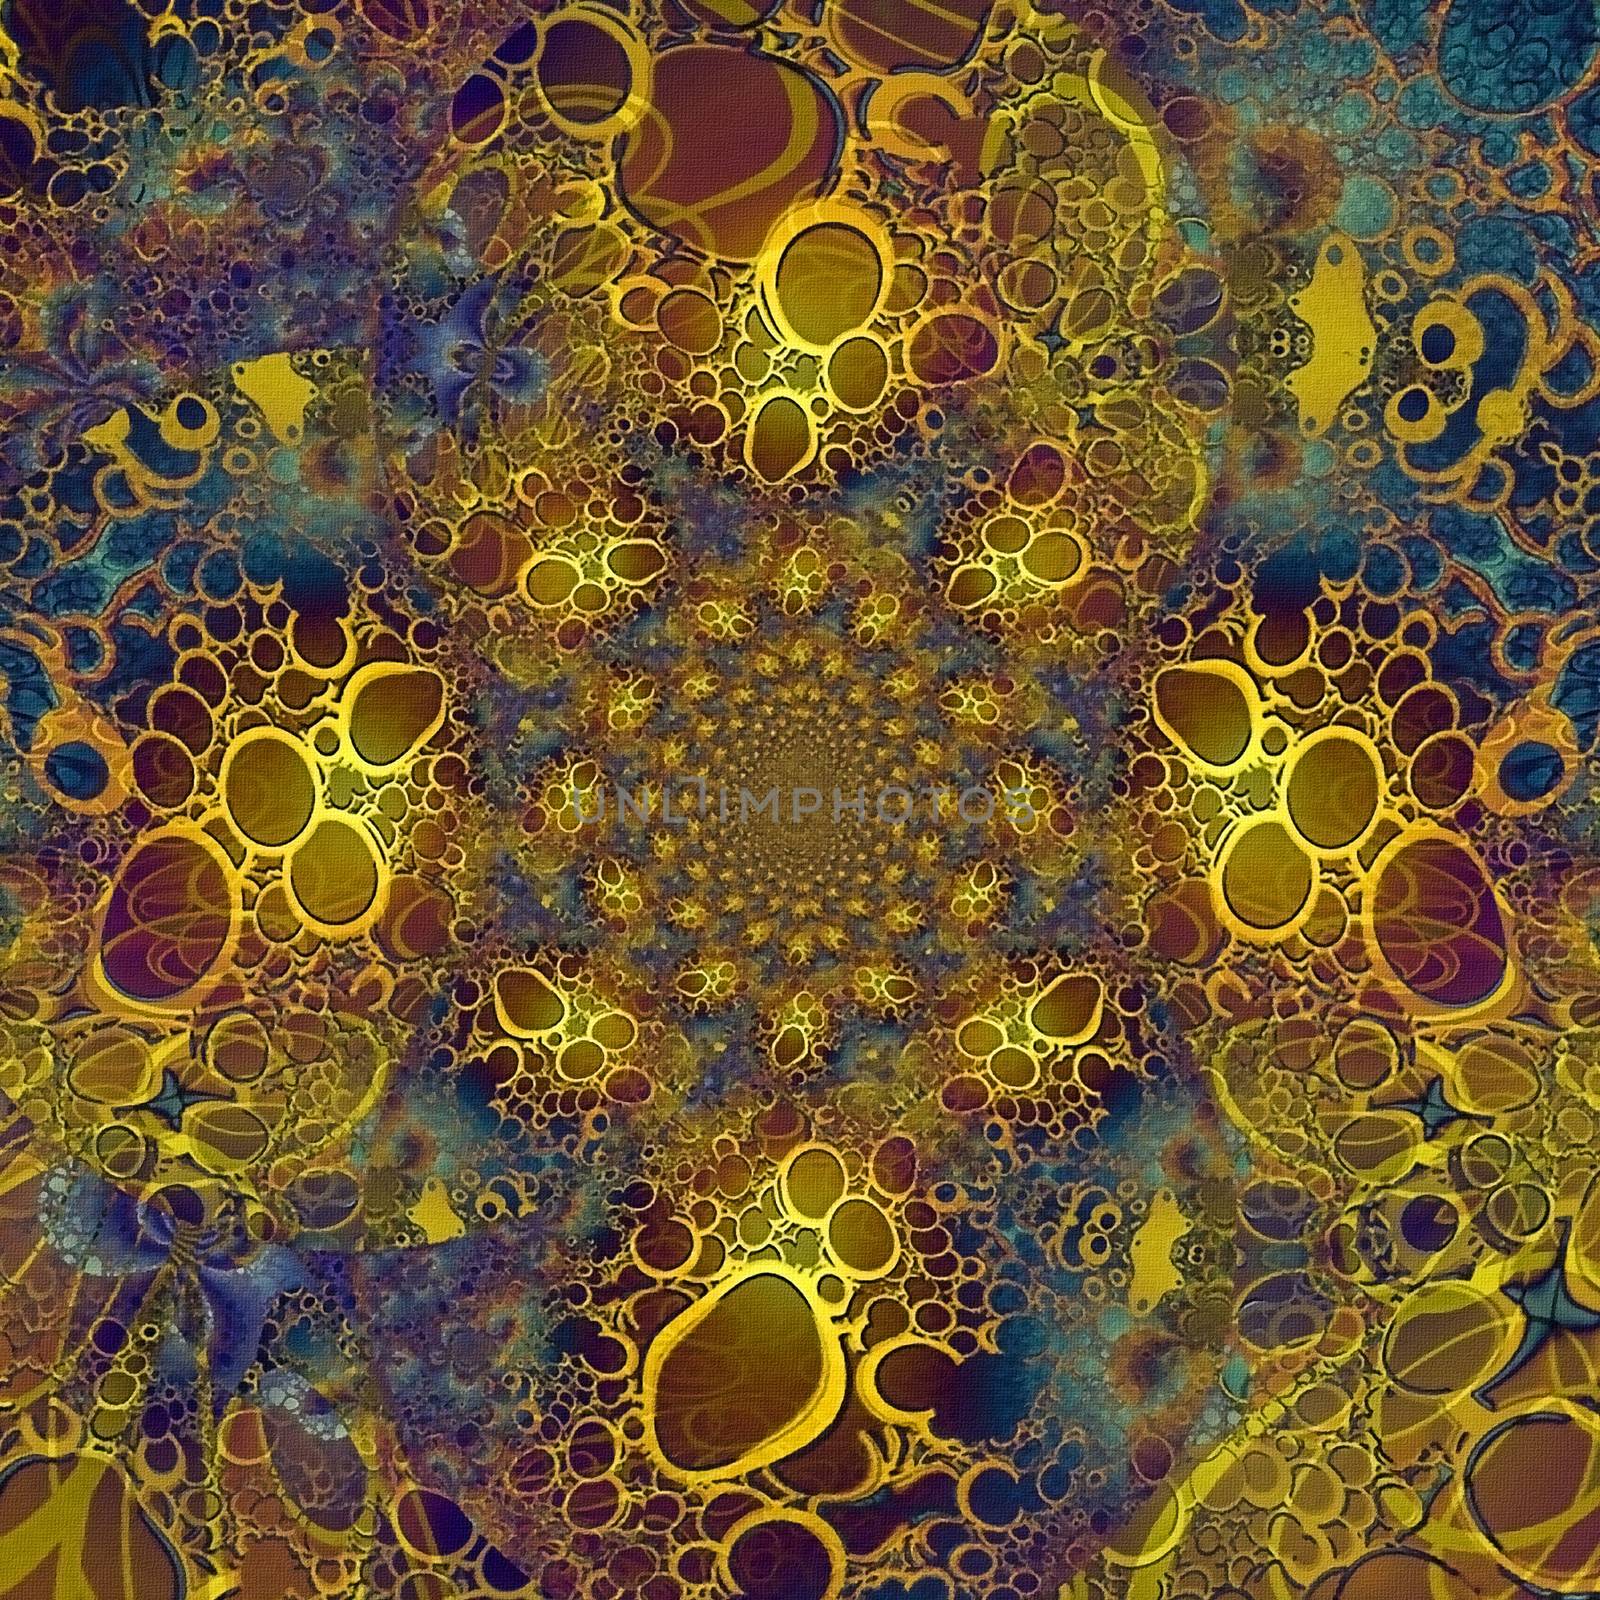 Abstract fractal with ring shapes. 3D rendering